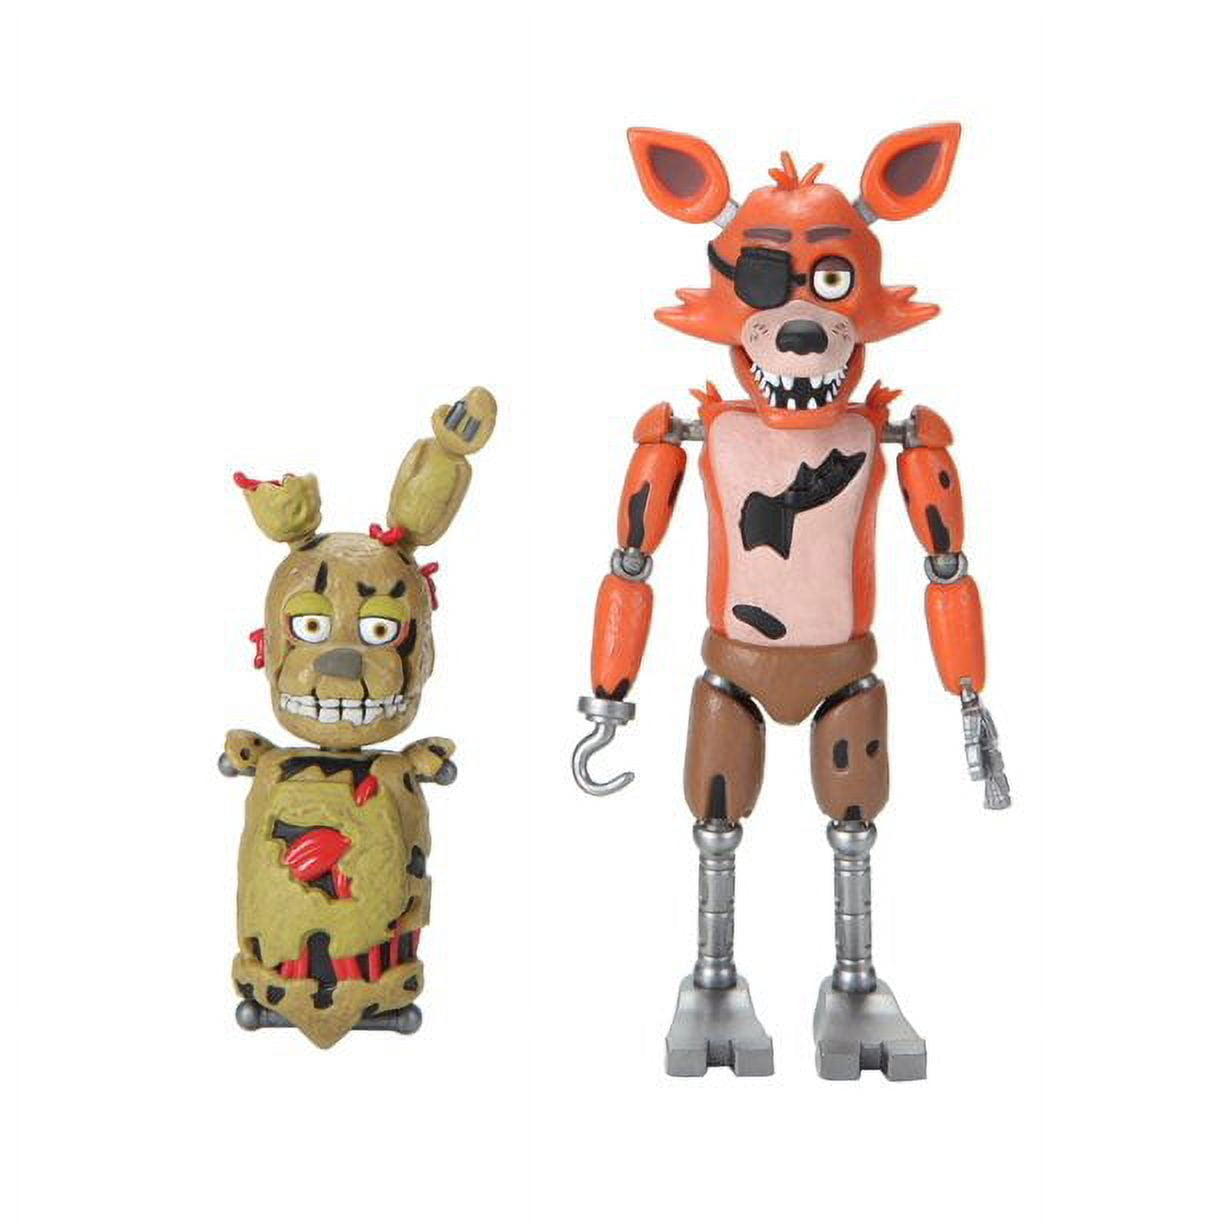 Five Nights at Freddy's Action Figure “Nightmare Foxy” 5” tall.